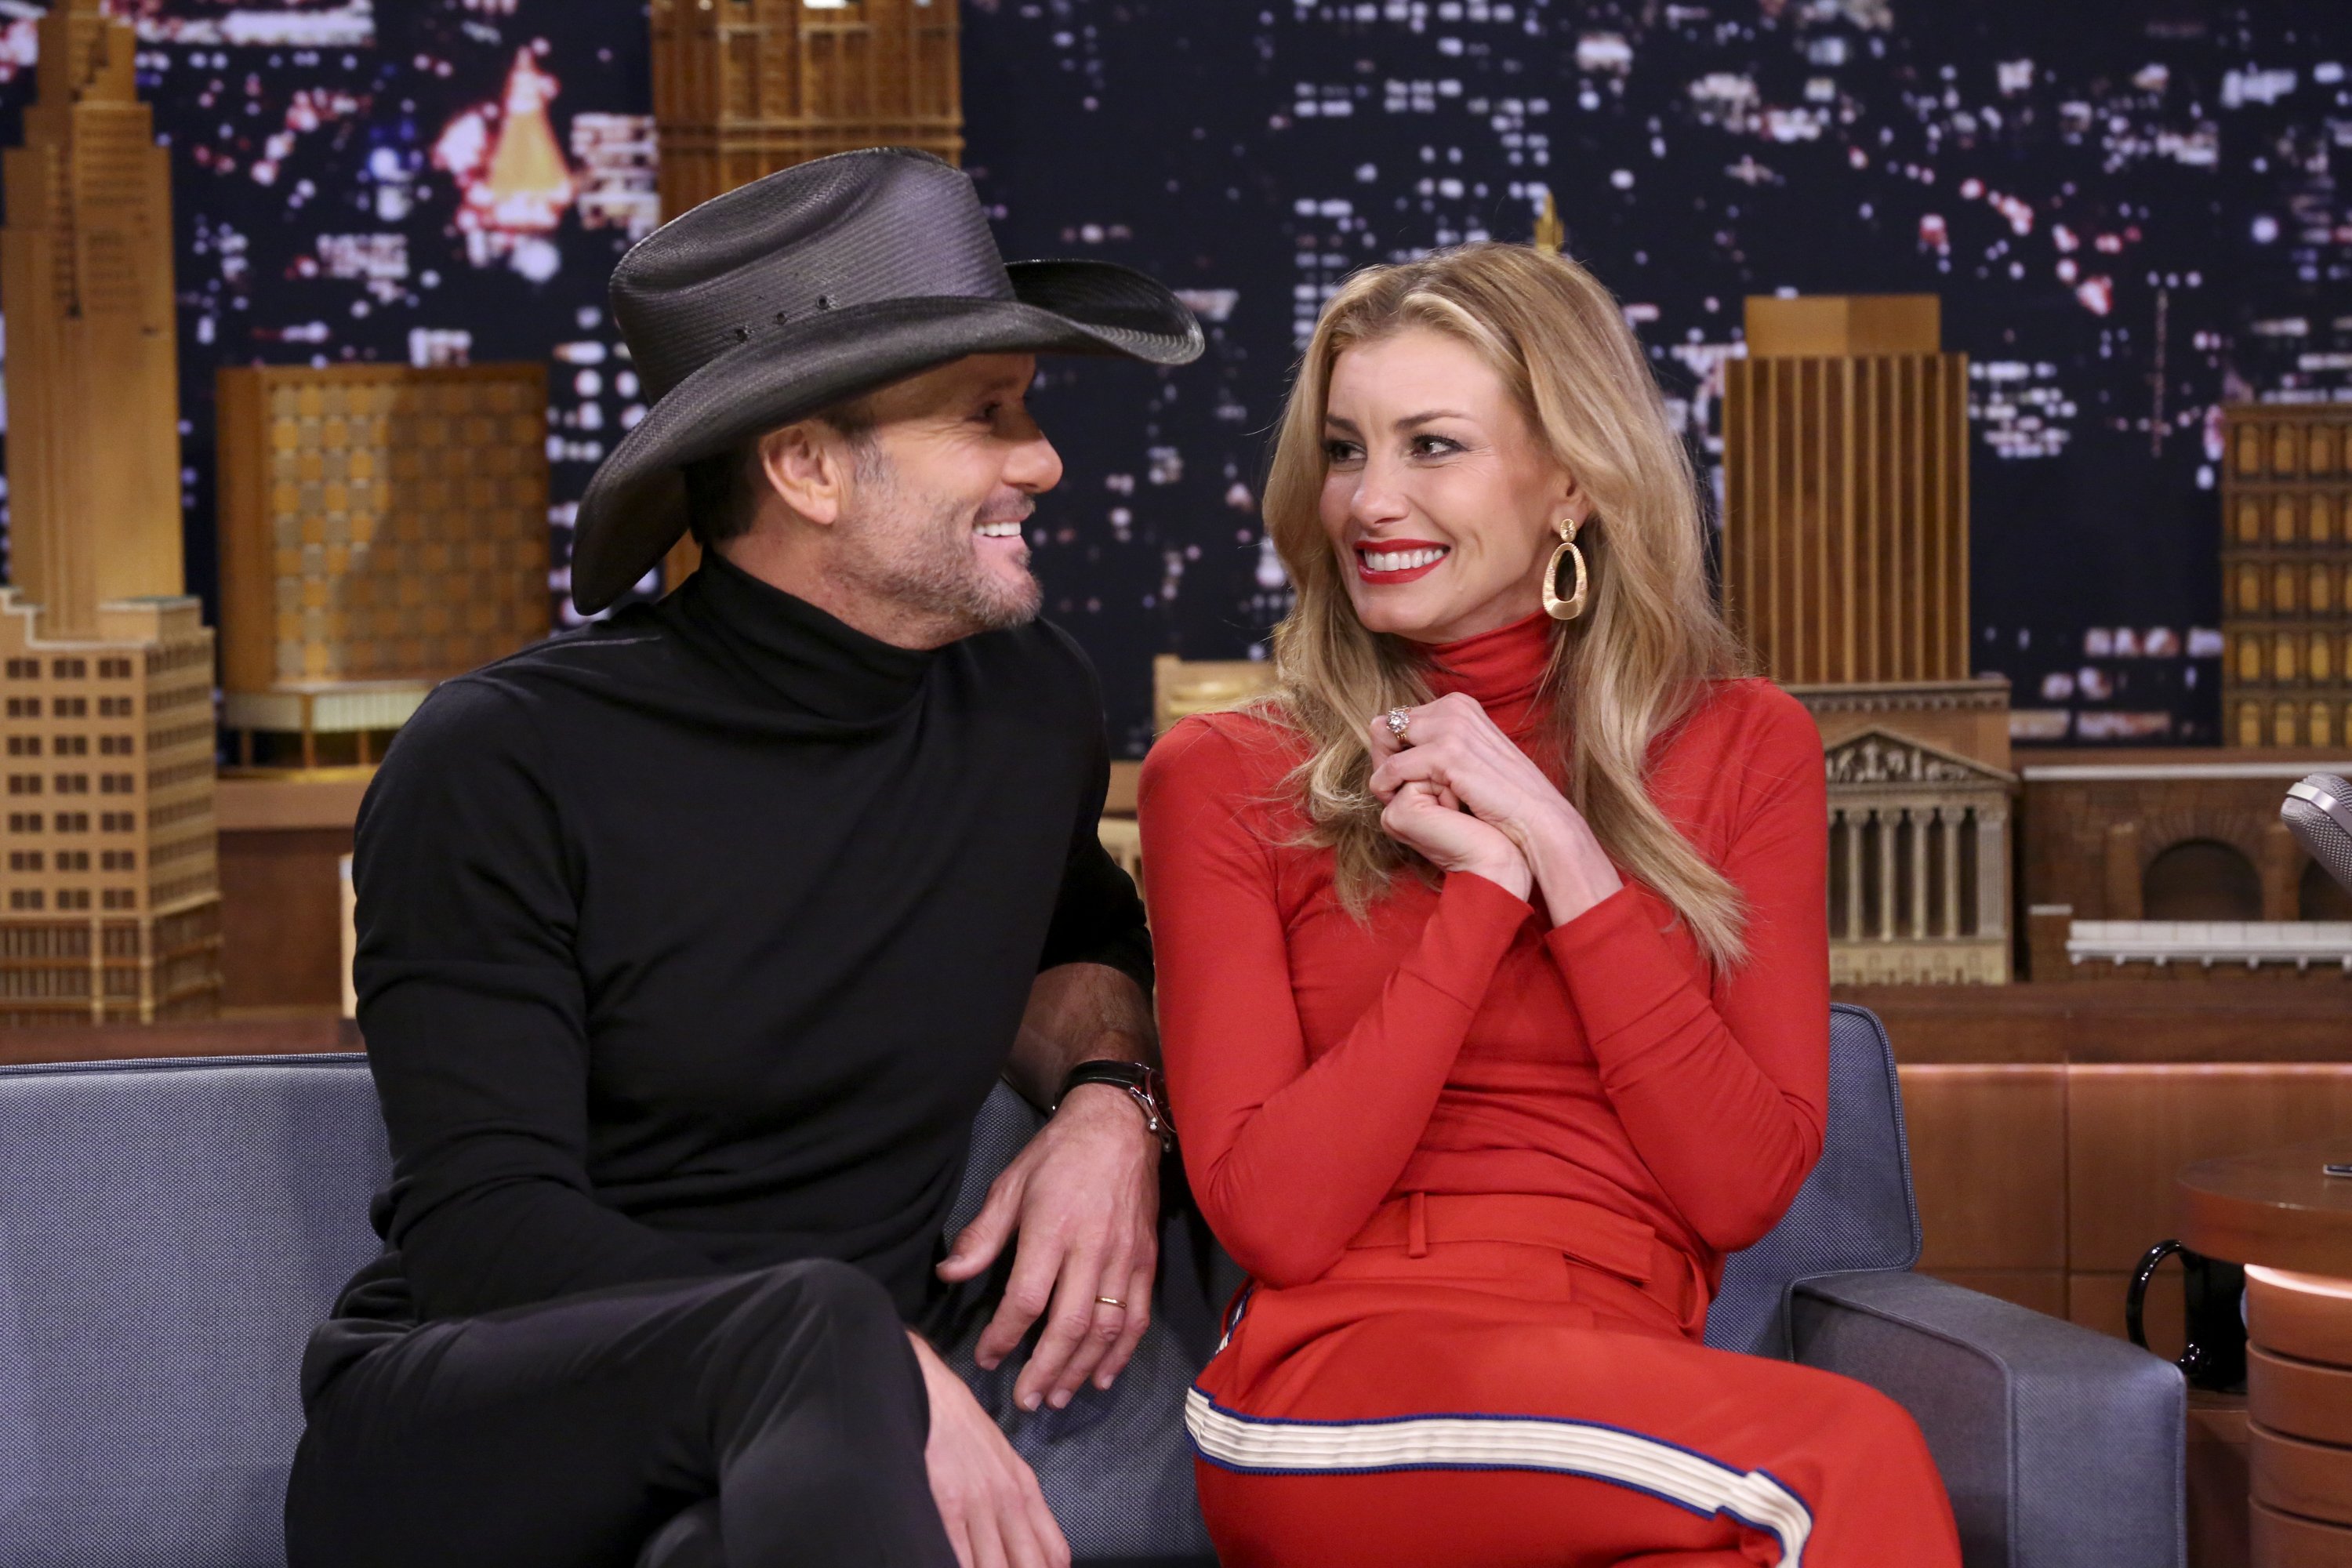  Singers Tim McGraw and Faith Hill during an interview on "The Tonight Show Starring Jimmy Fallon" on November 16, 2017 | Source: Getty Images